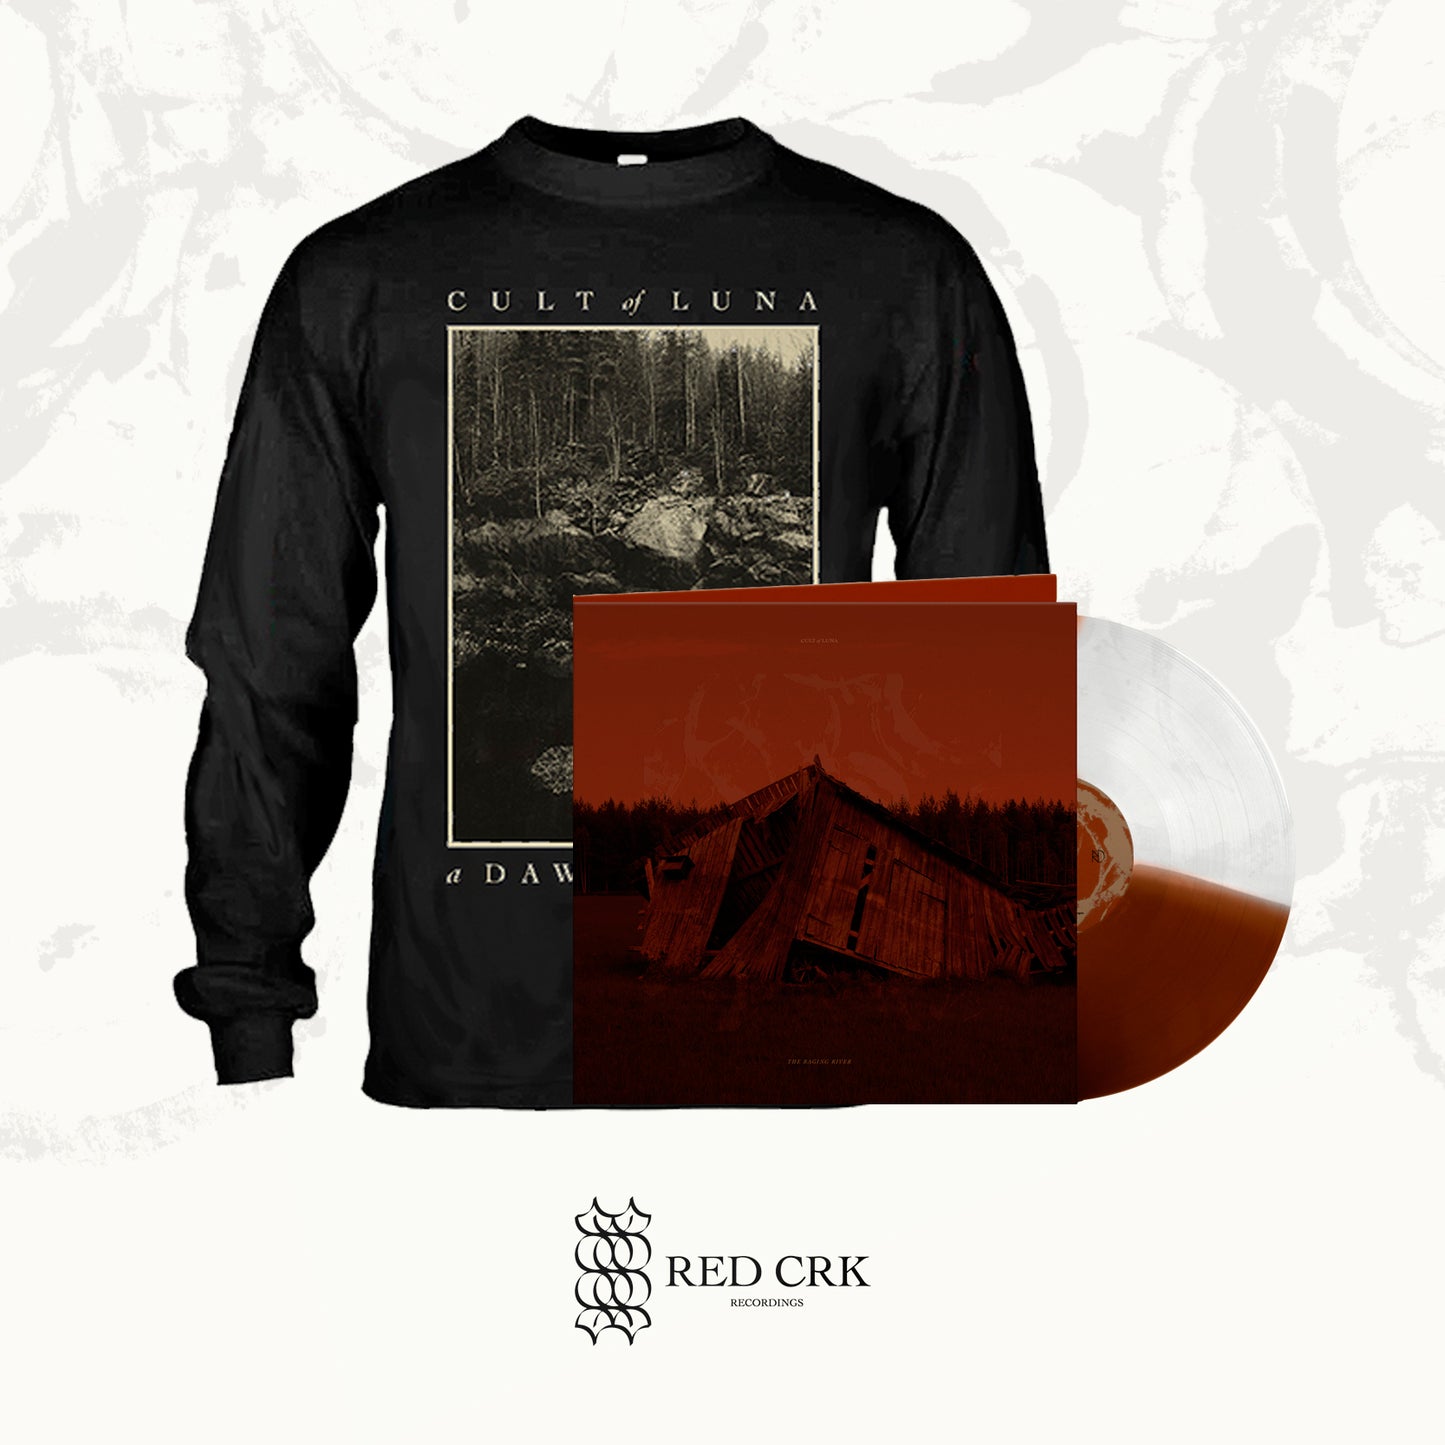 CULT OF LUNA - The Raging River LP Gtfold (Half/Half - Transparent and Brown) + A Dawn to Fear (Hill) Shirt Long Sleeves